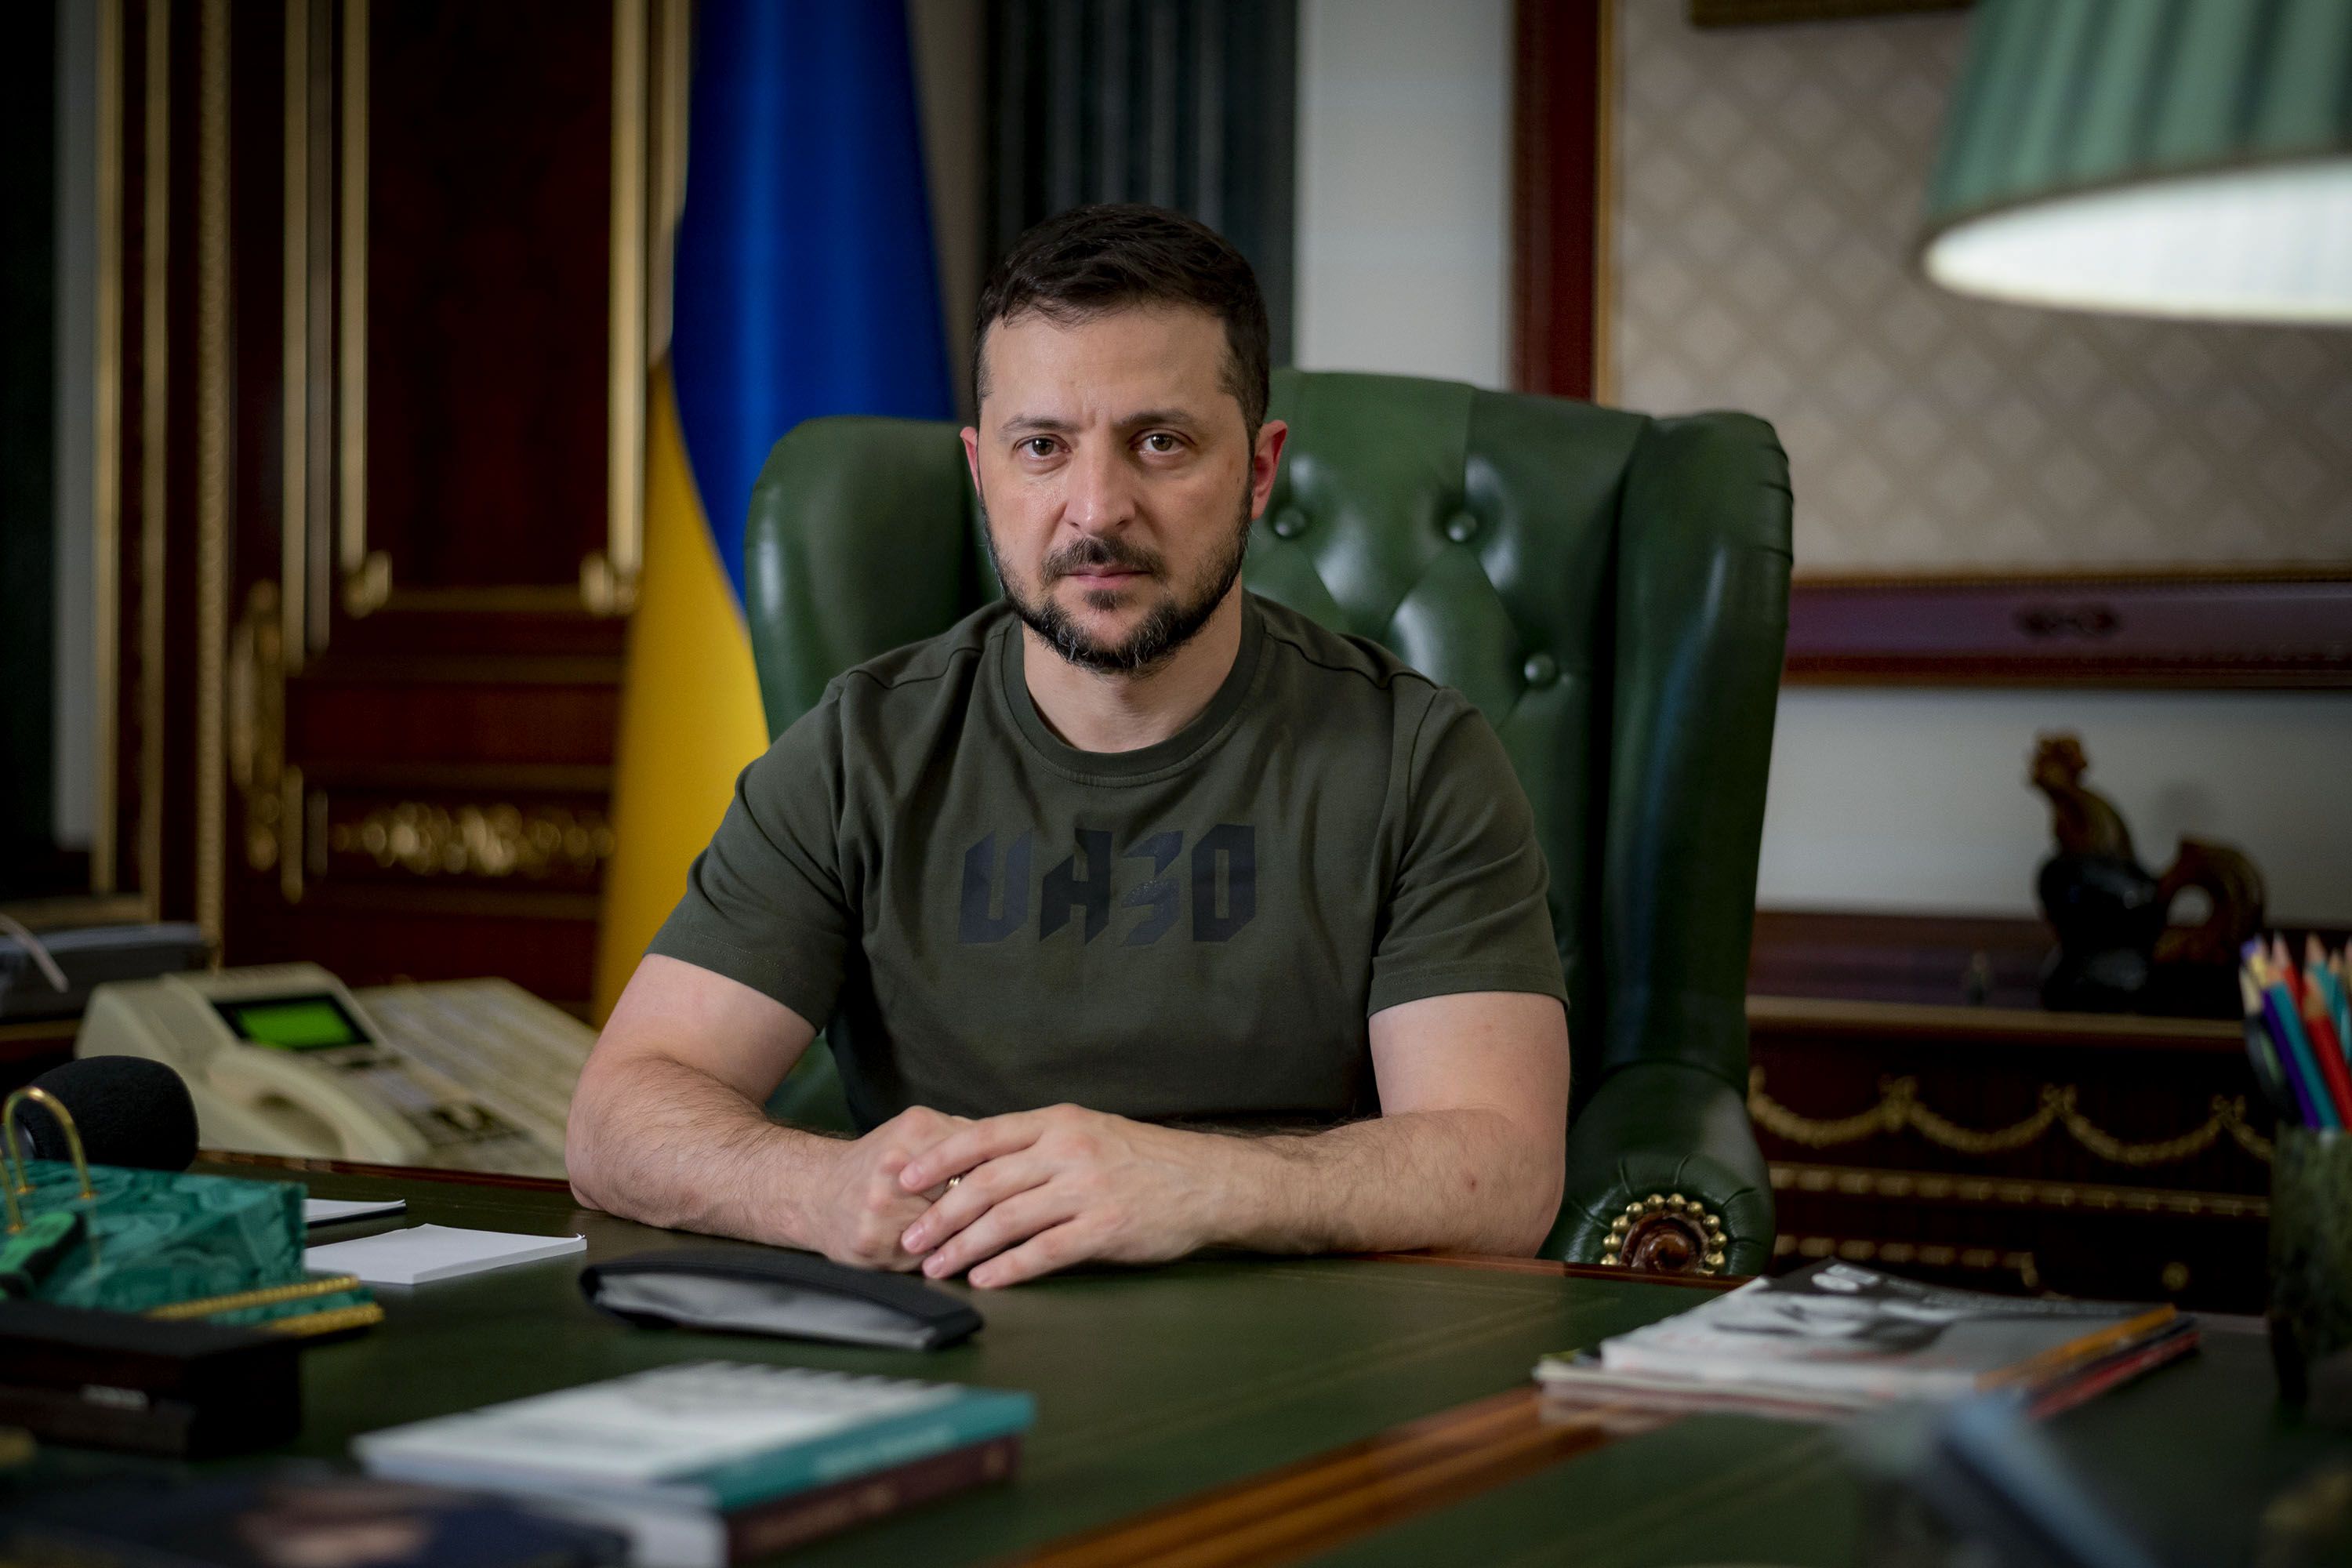 The more losses the occupiers suffer, the sooner we will be able to liberate our land - address by the President of Ukraine